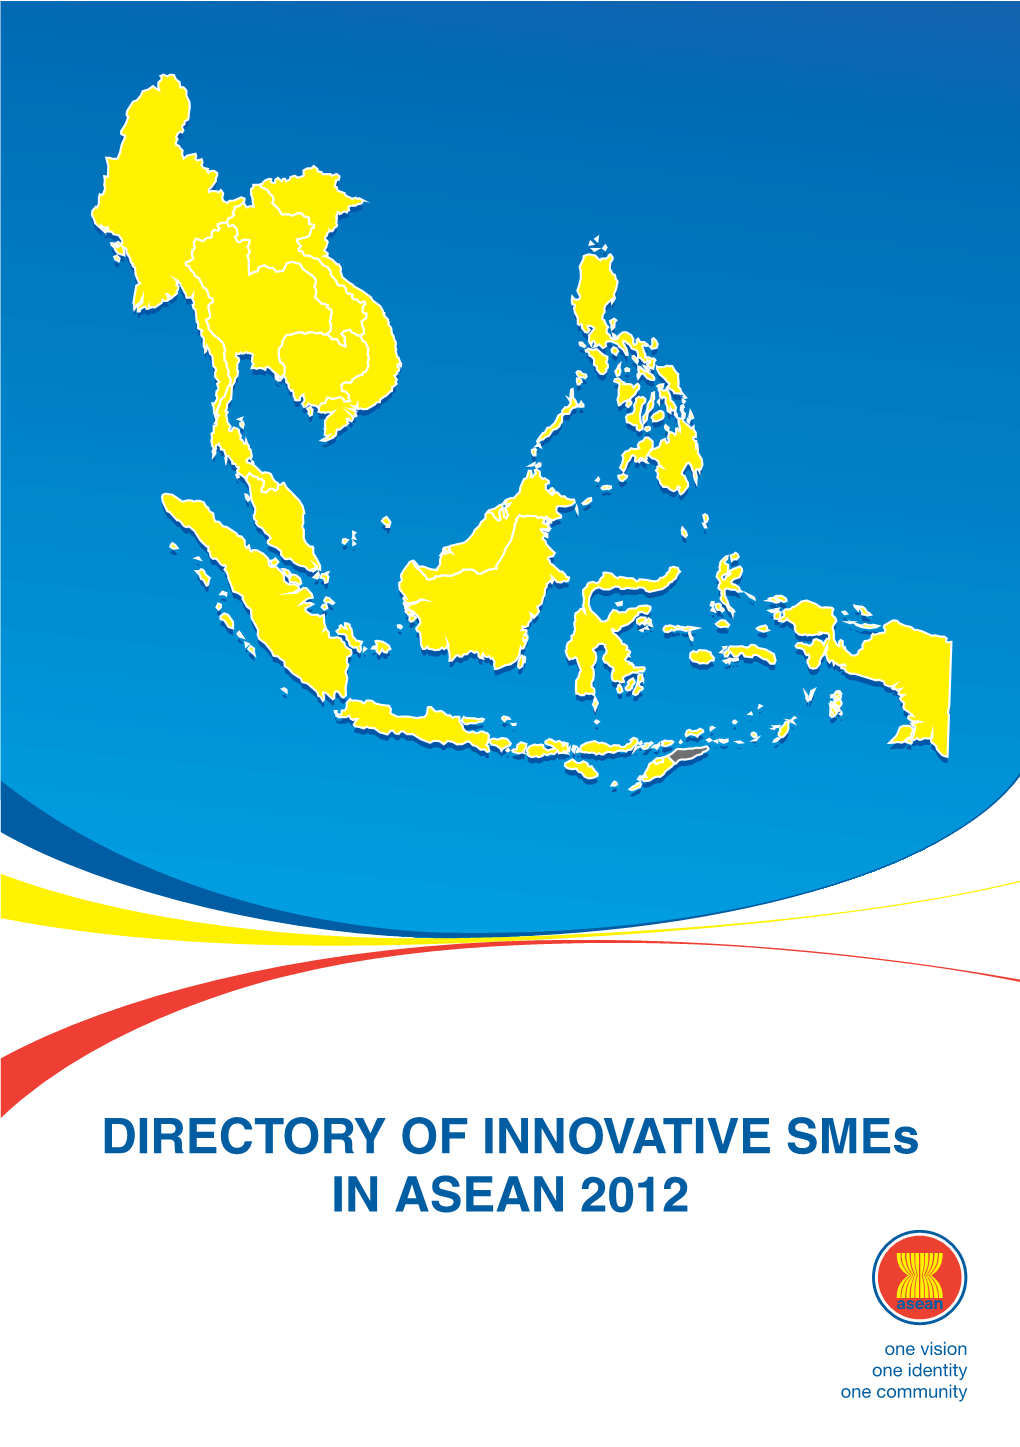 Directory of Innovative Smes in ASEAN 2012